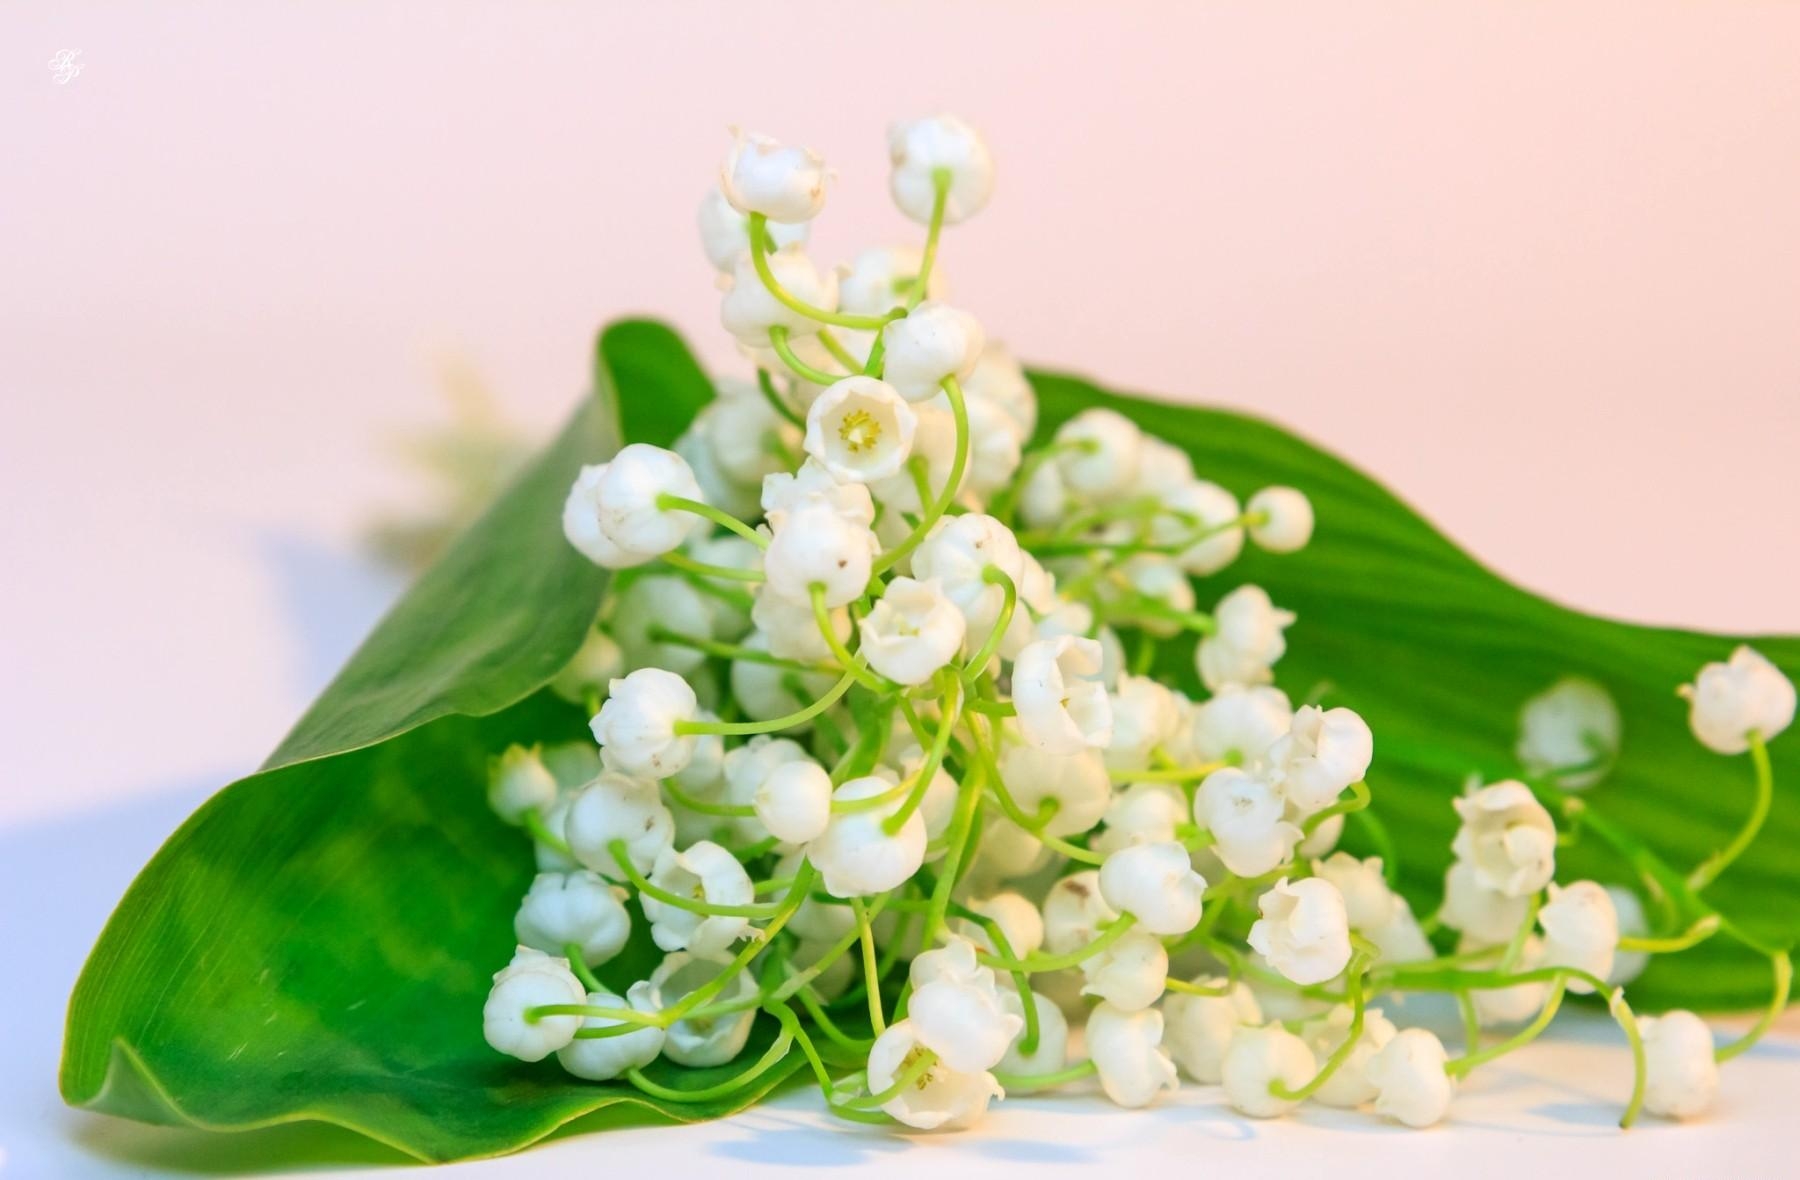 lily of the valley, flowers, bluebells, white, to lie down, lie, spring, snow white